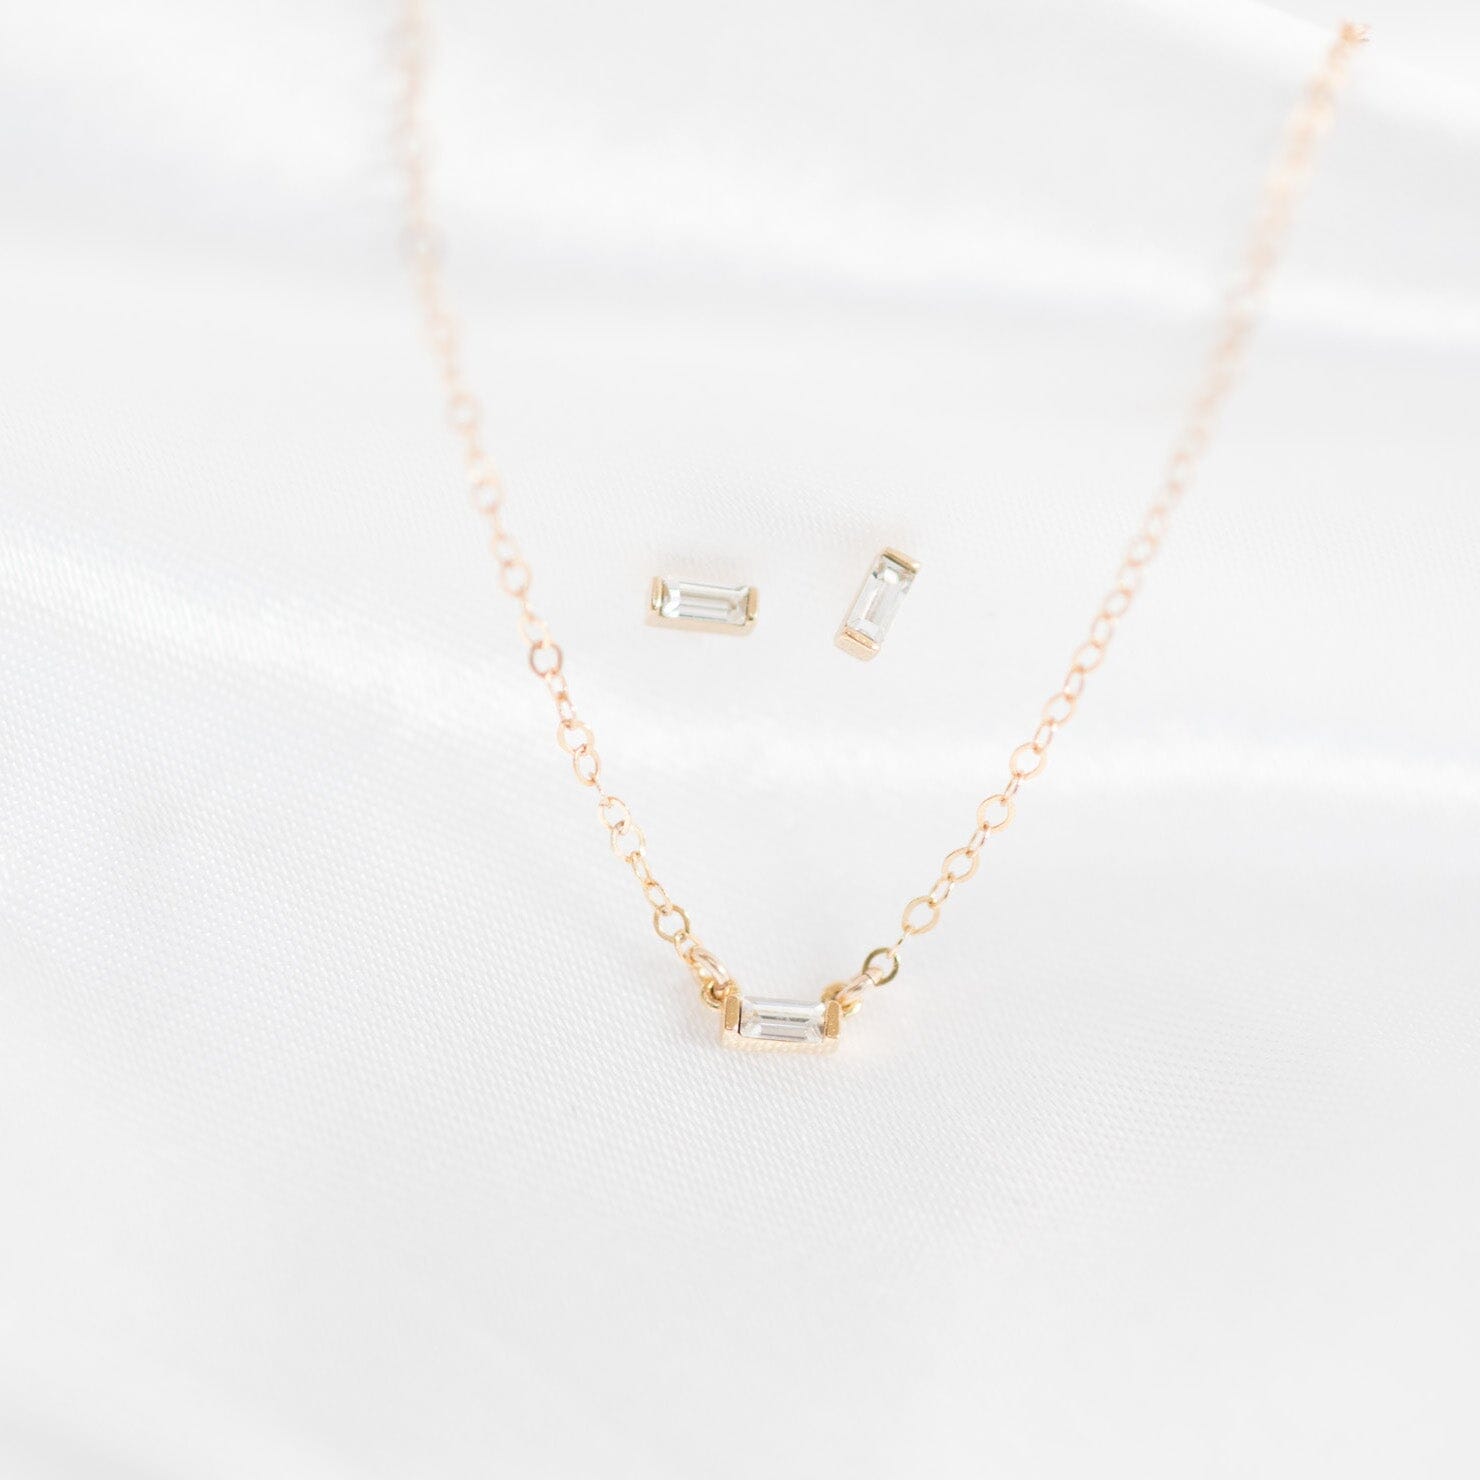 Shop Elegant Baguette Necklace and nickel-free Baguette Studs with a Swarovski Crystal made in America by Katie Dean Jewelry